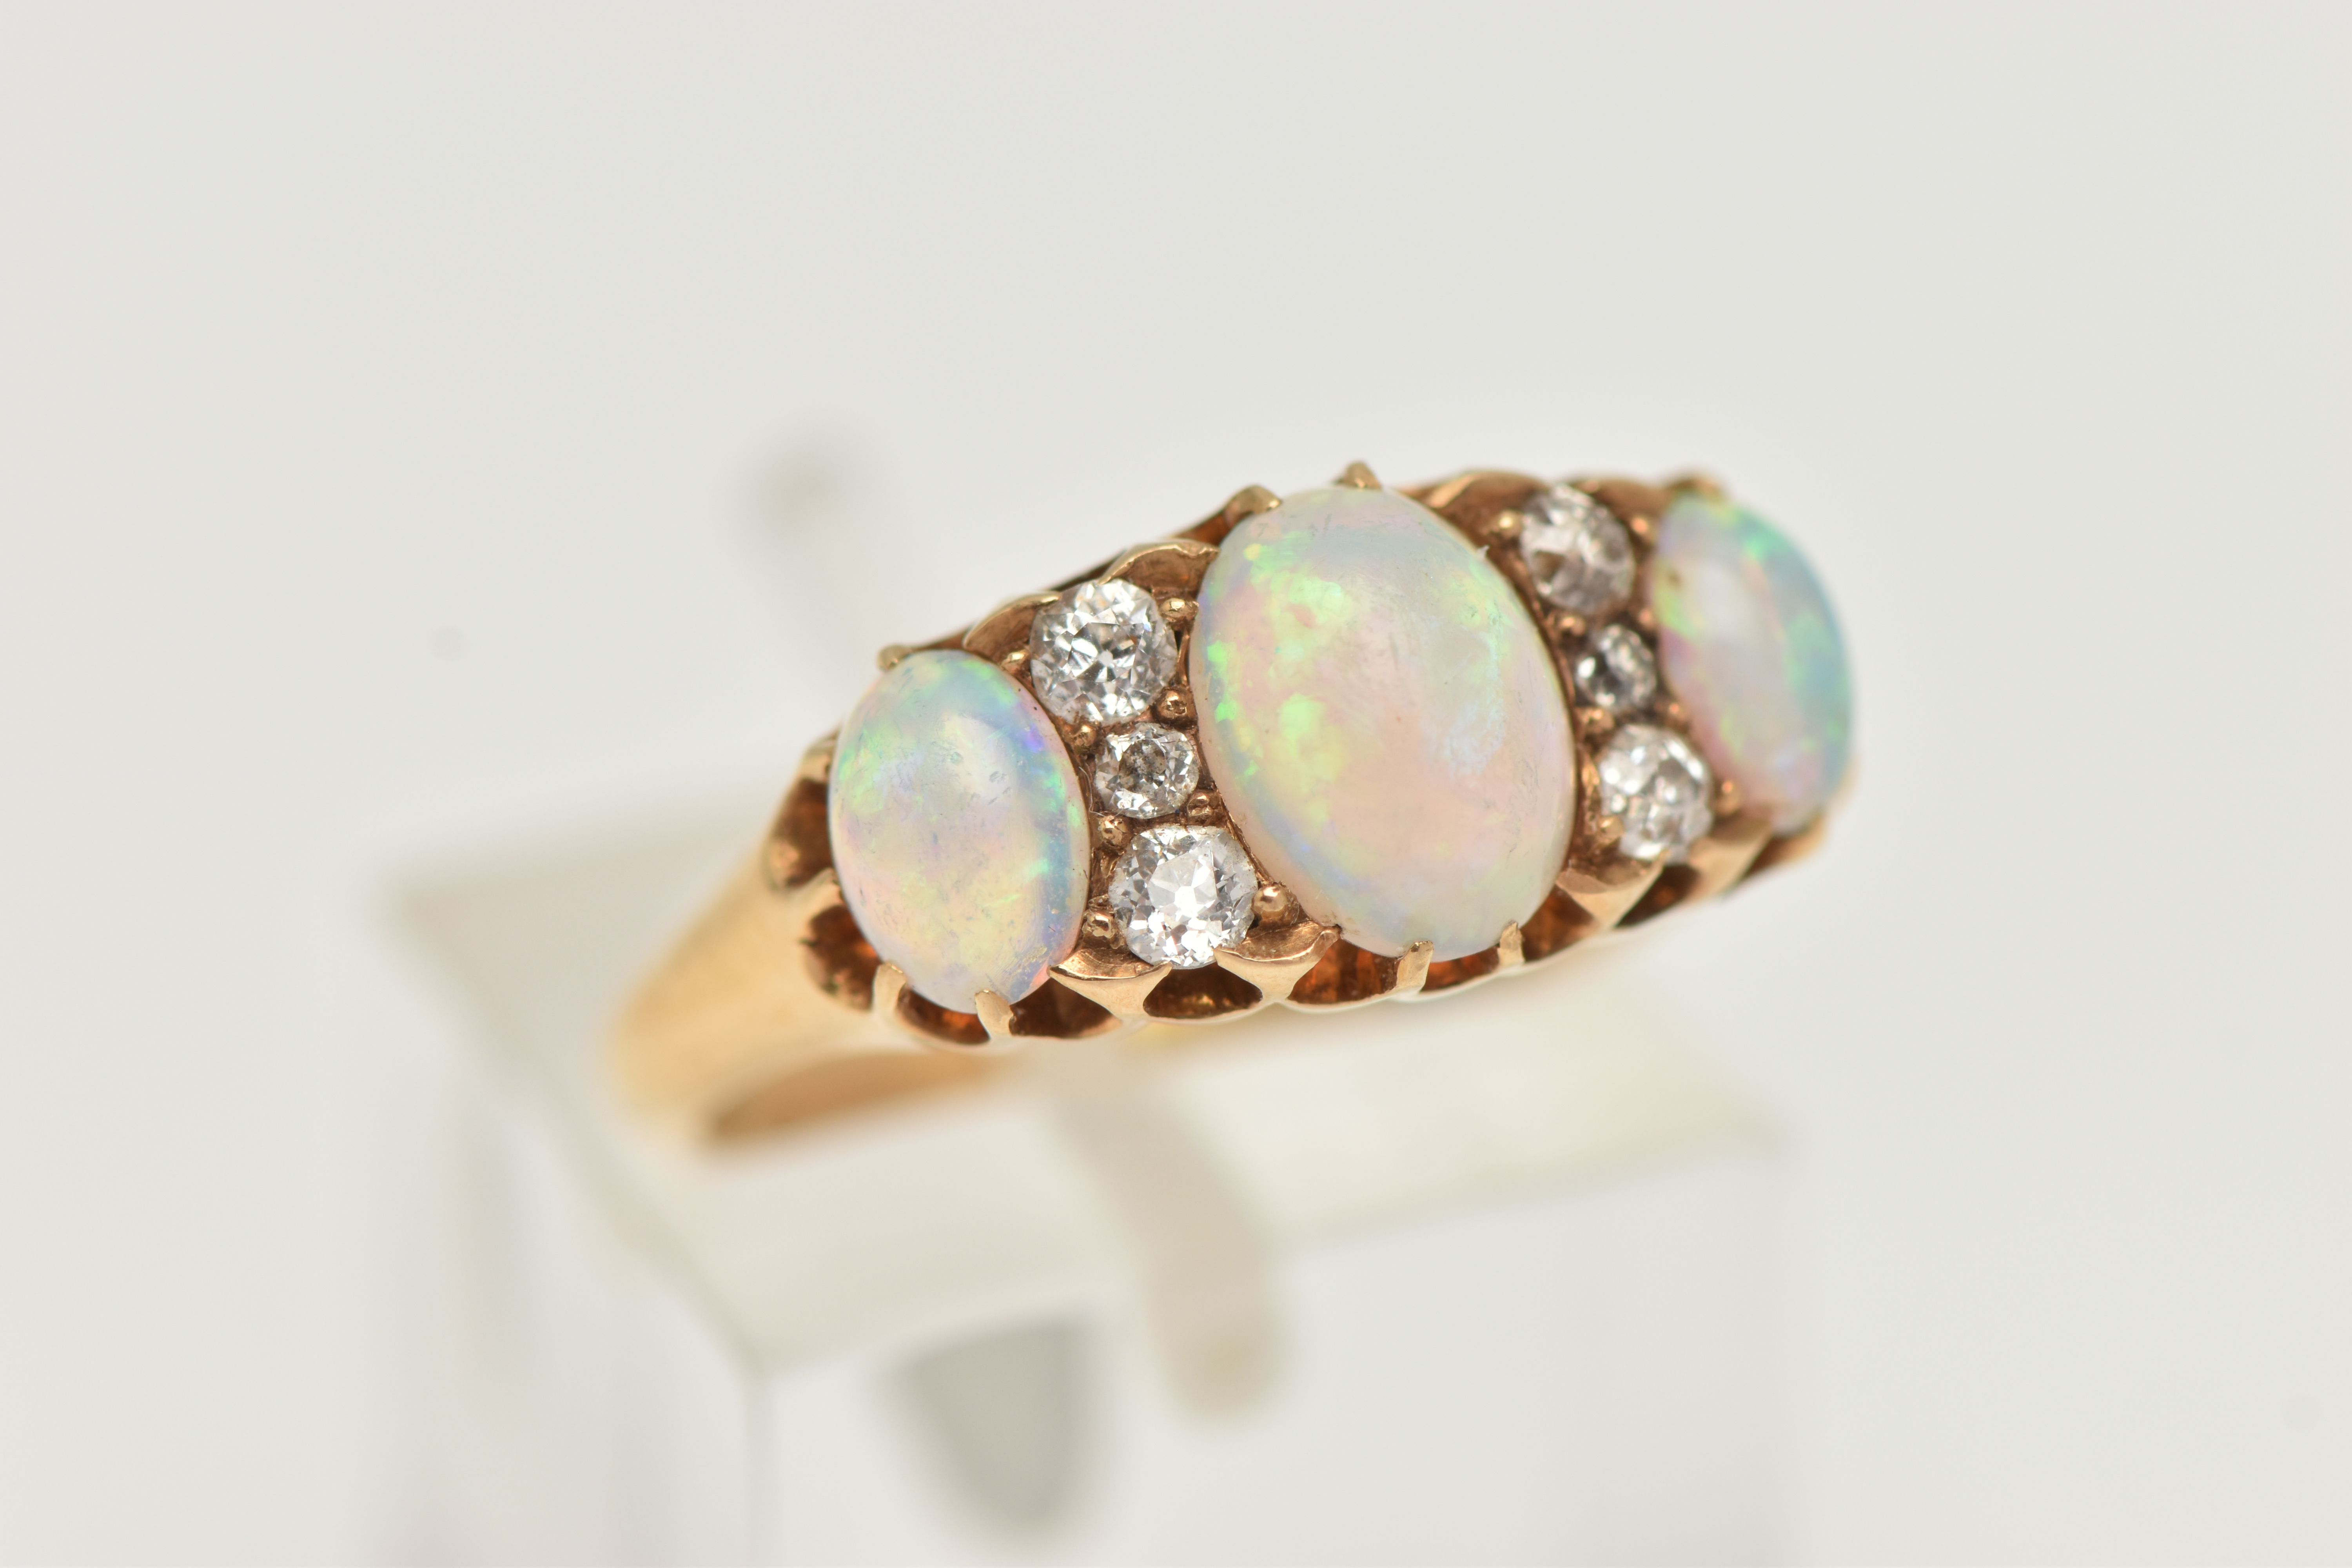 AN EARLY 20TH CENTURY OPAL AND DIAMOND RING, three oval cabochon opals prong set in yellow metal, - Image 4 of 4